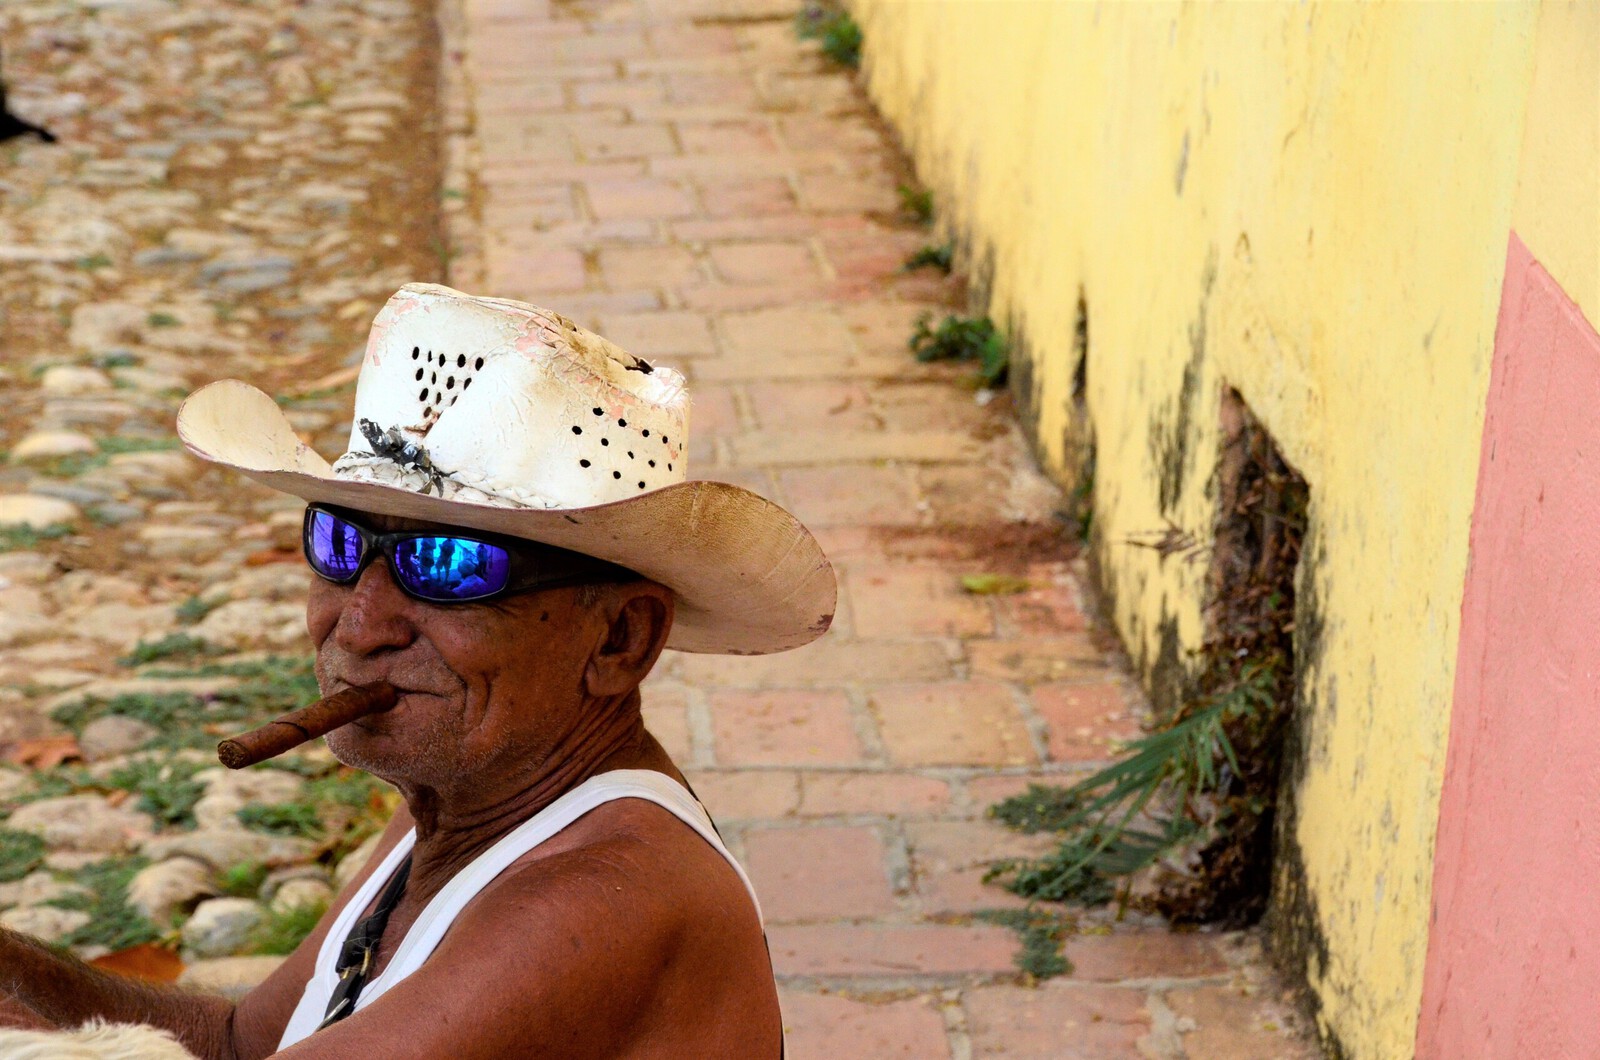 Humans of the world 16/Cuba